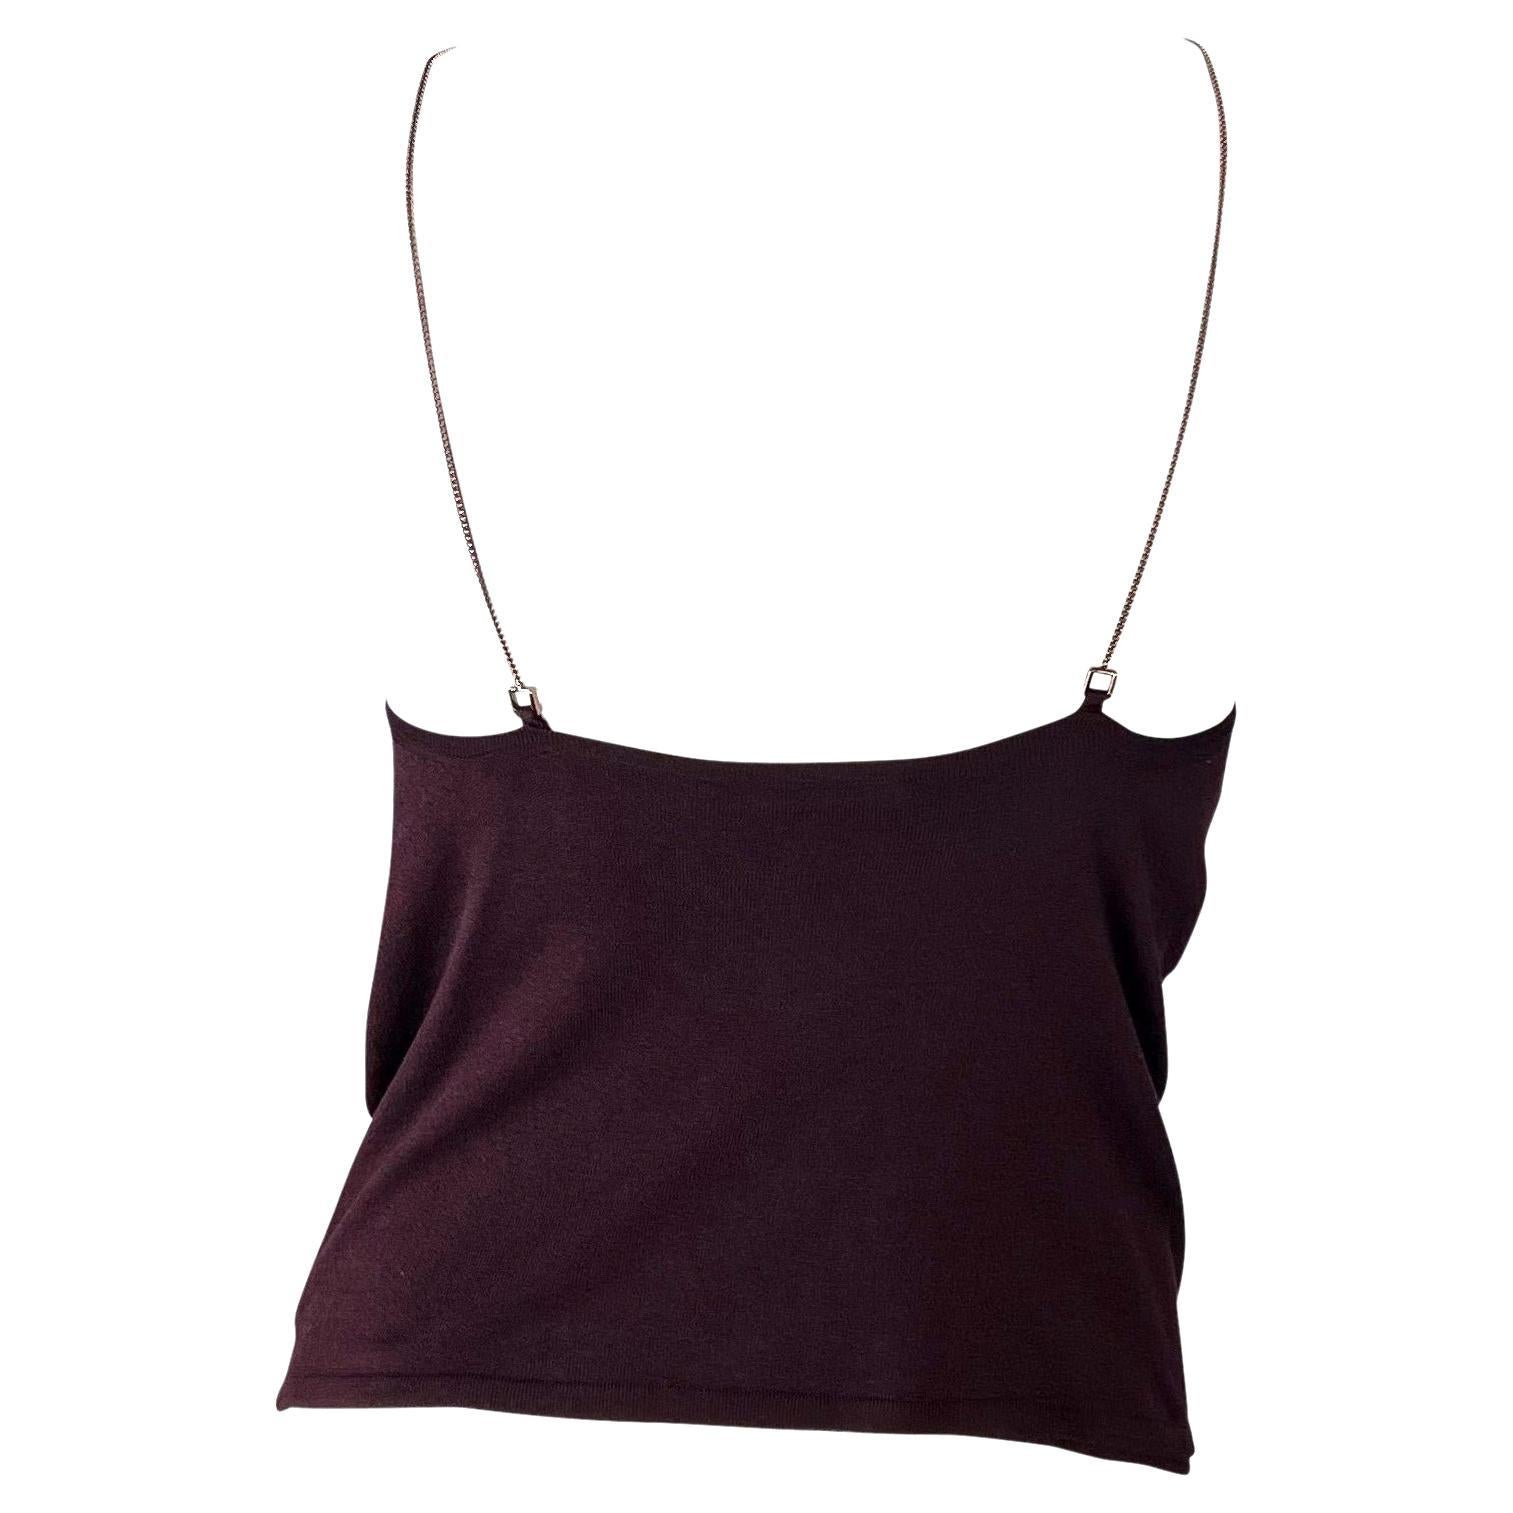 Late 1990s Gucci by Tom Ford Burgundy Knit Silk Chain Tank Top In Excellent Condition For Sale In West Hollywood, CA